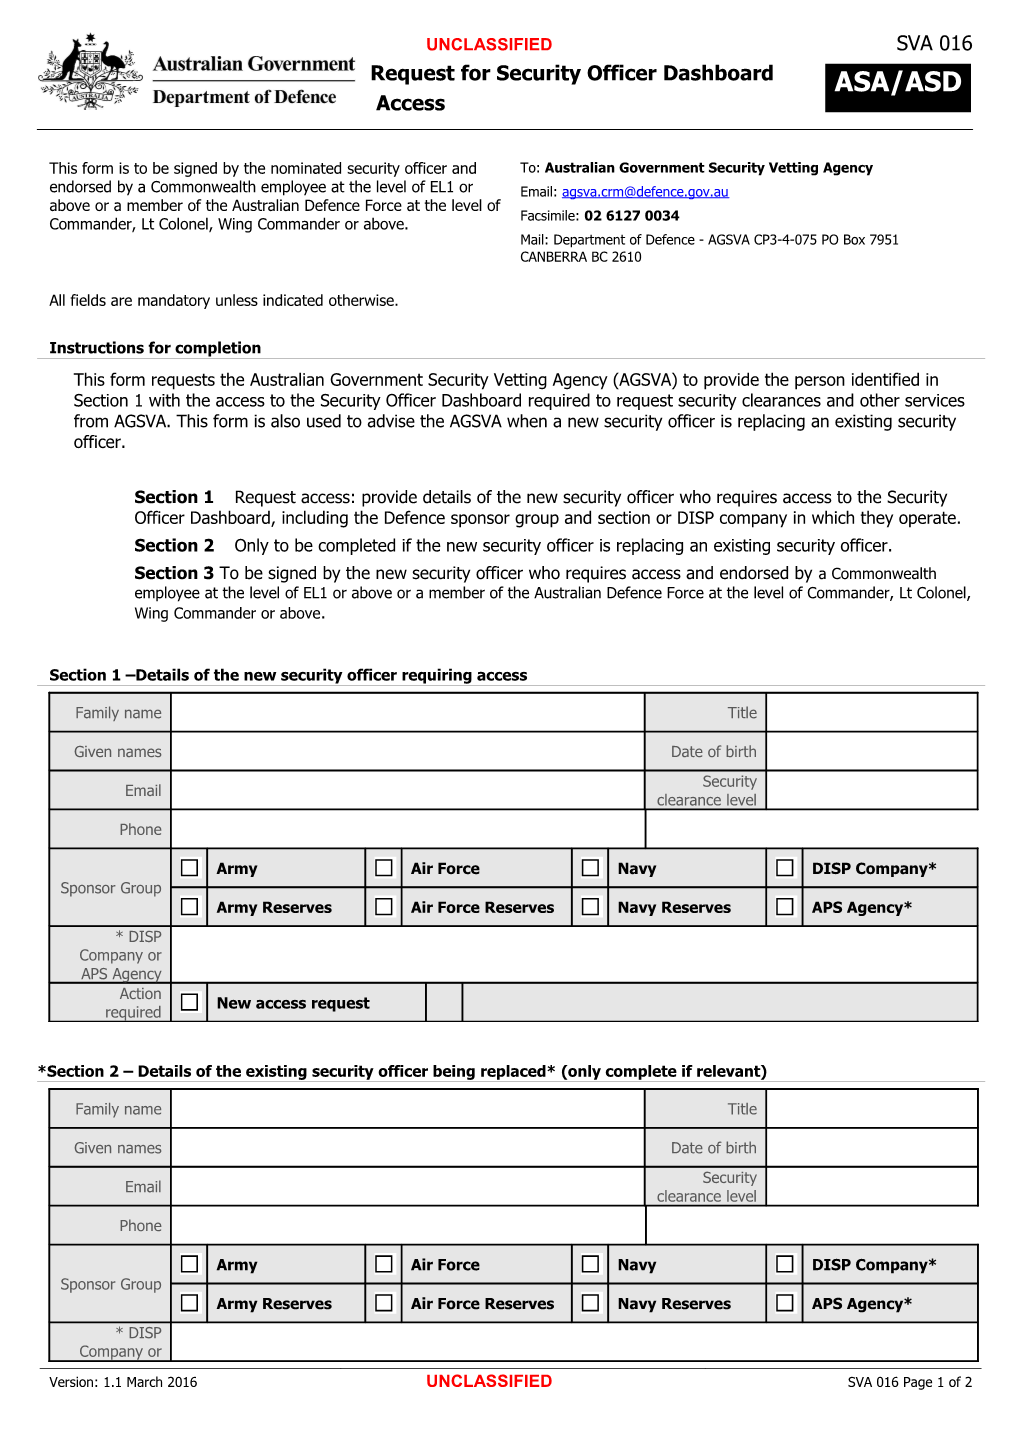 This Form Is to Be Completed by an Agency Security Advisor Or Delegate